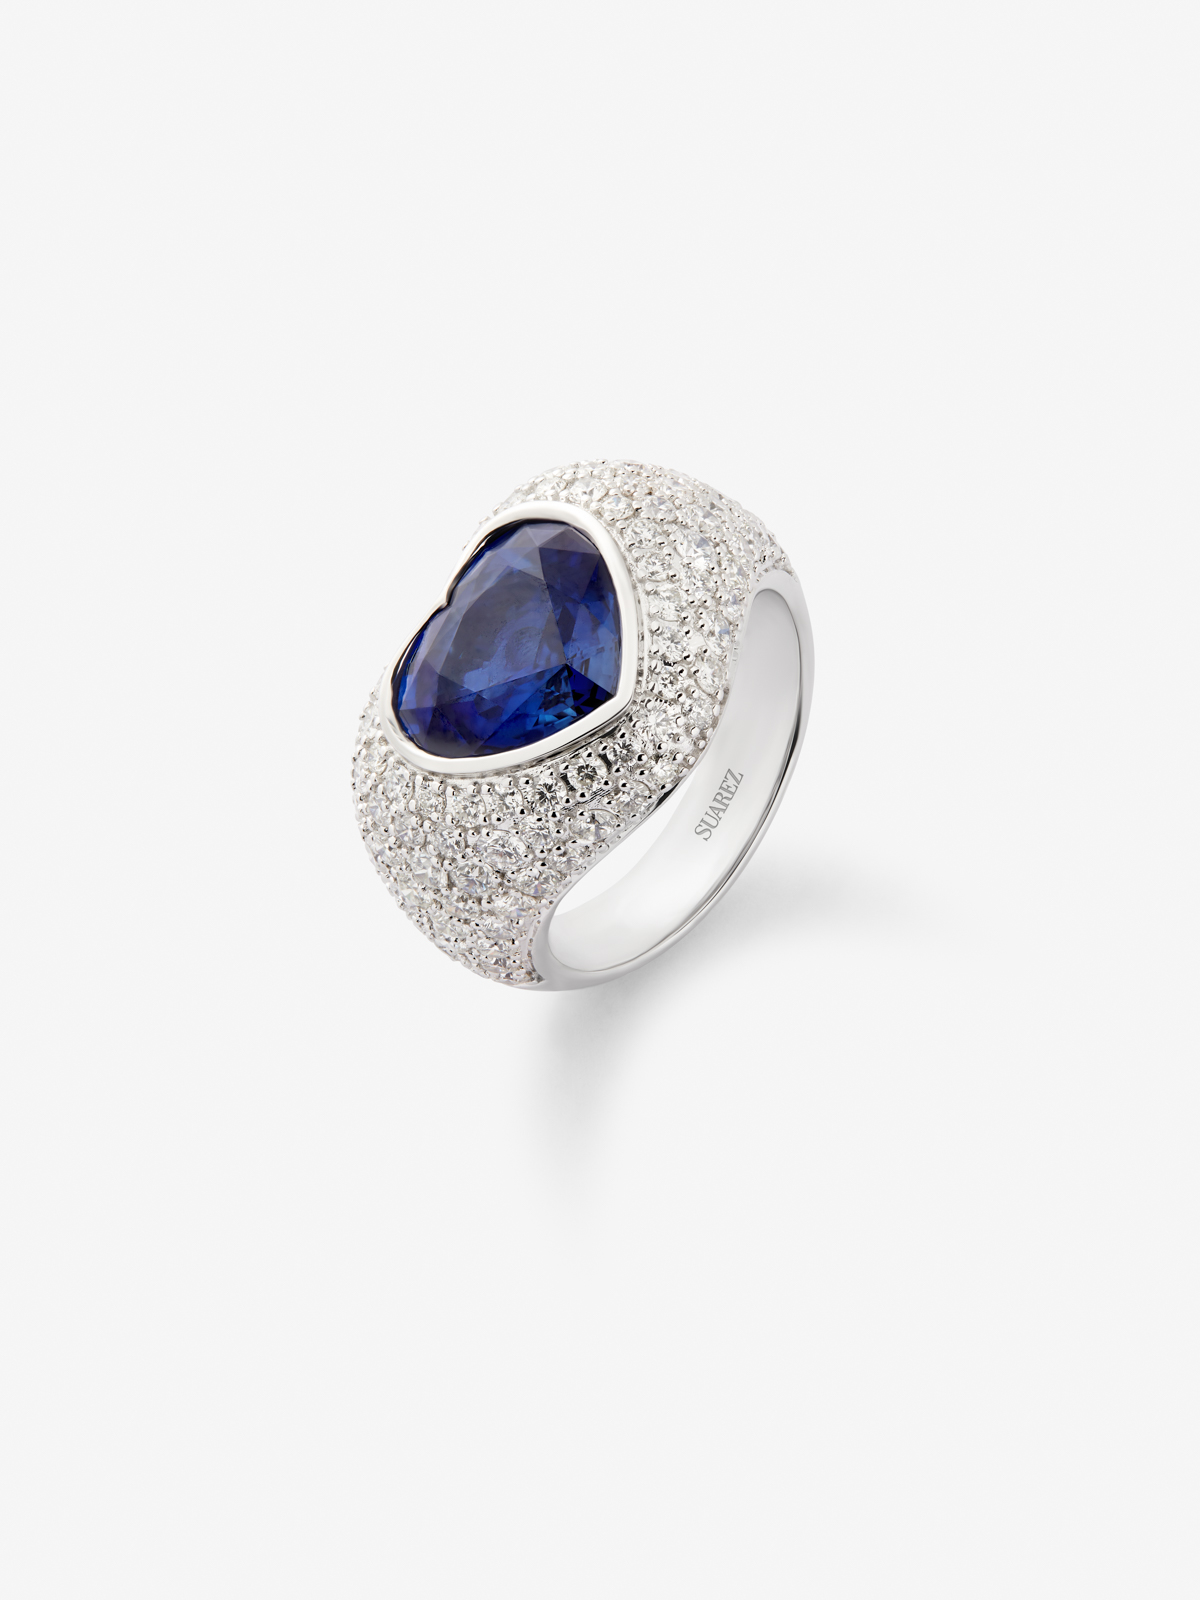 18K White Gold Ring with white diamond pavement in 2.19 cts and blue sapphire in 3.47 cts heart size